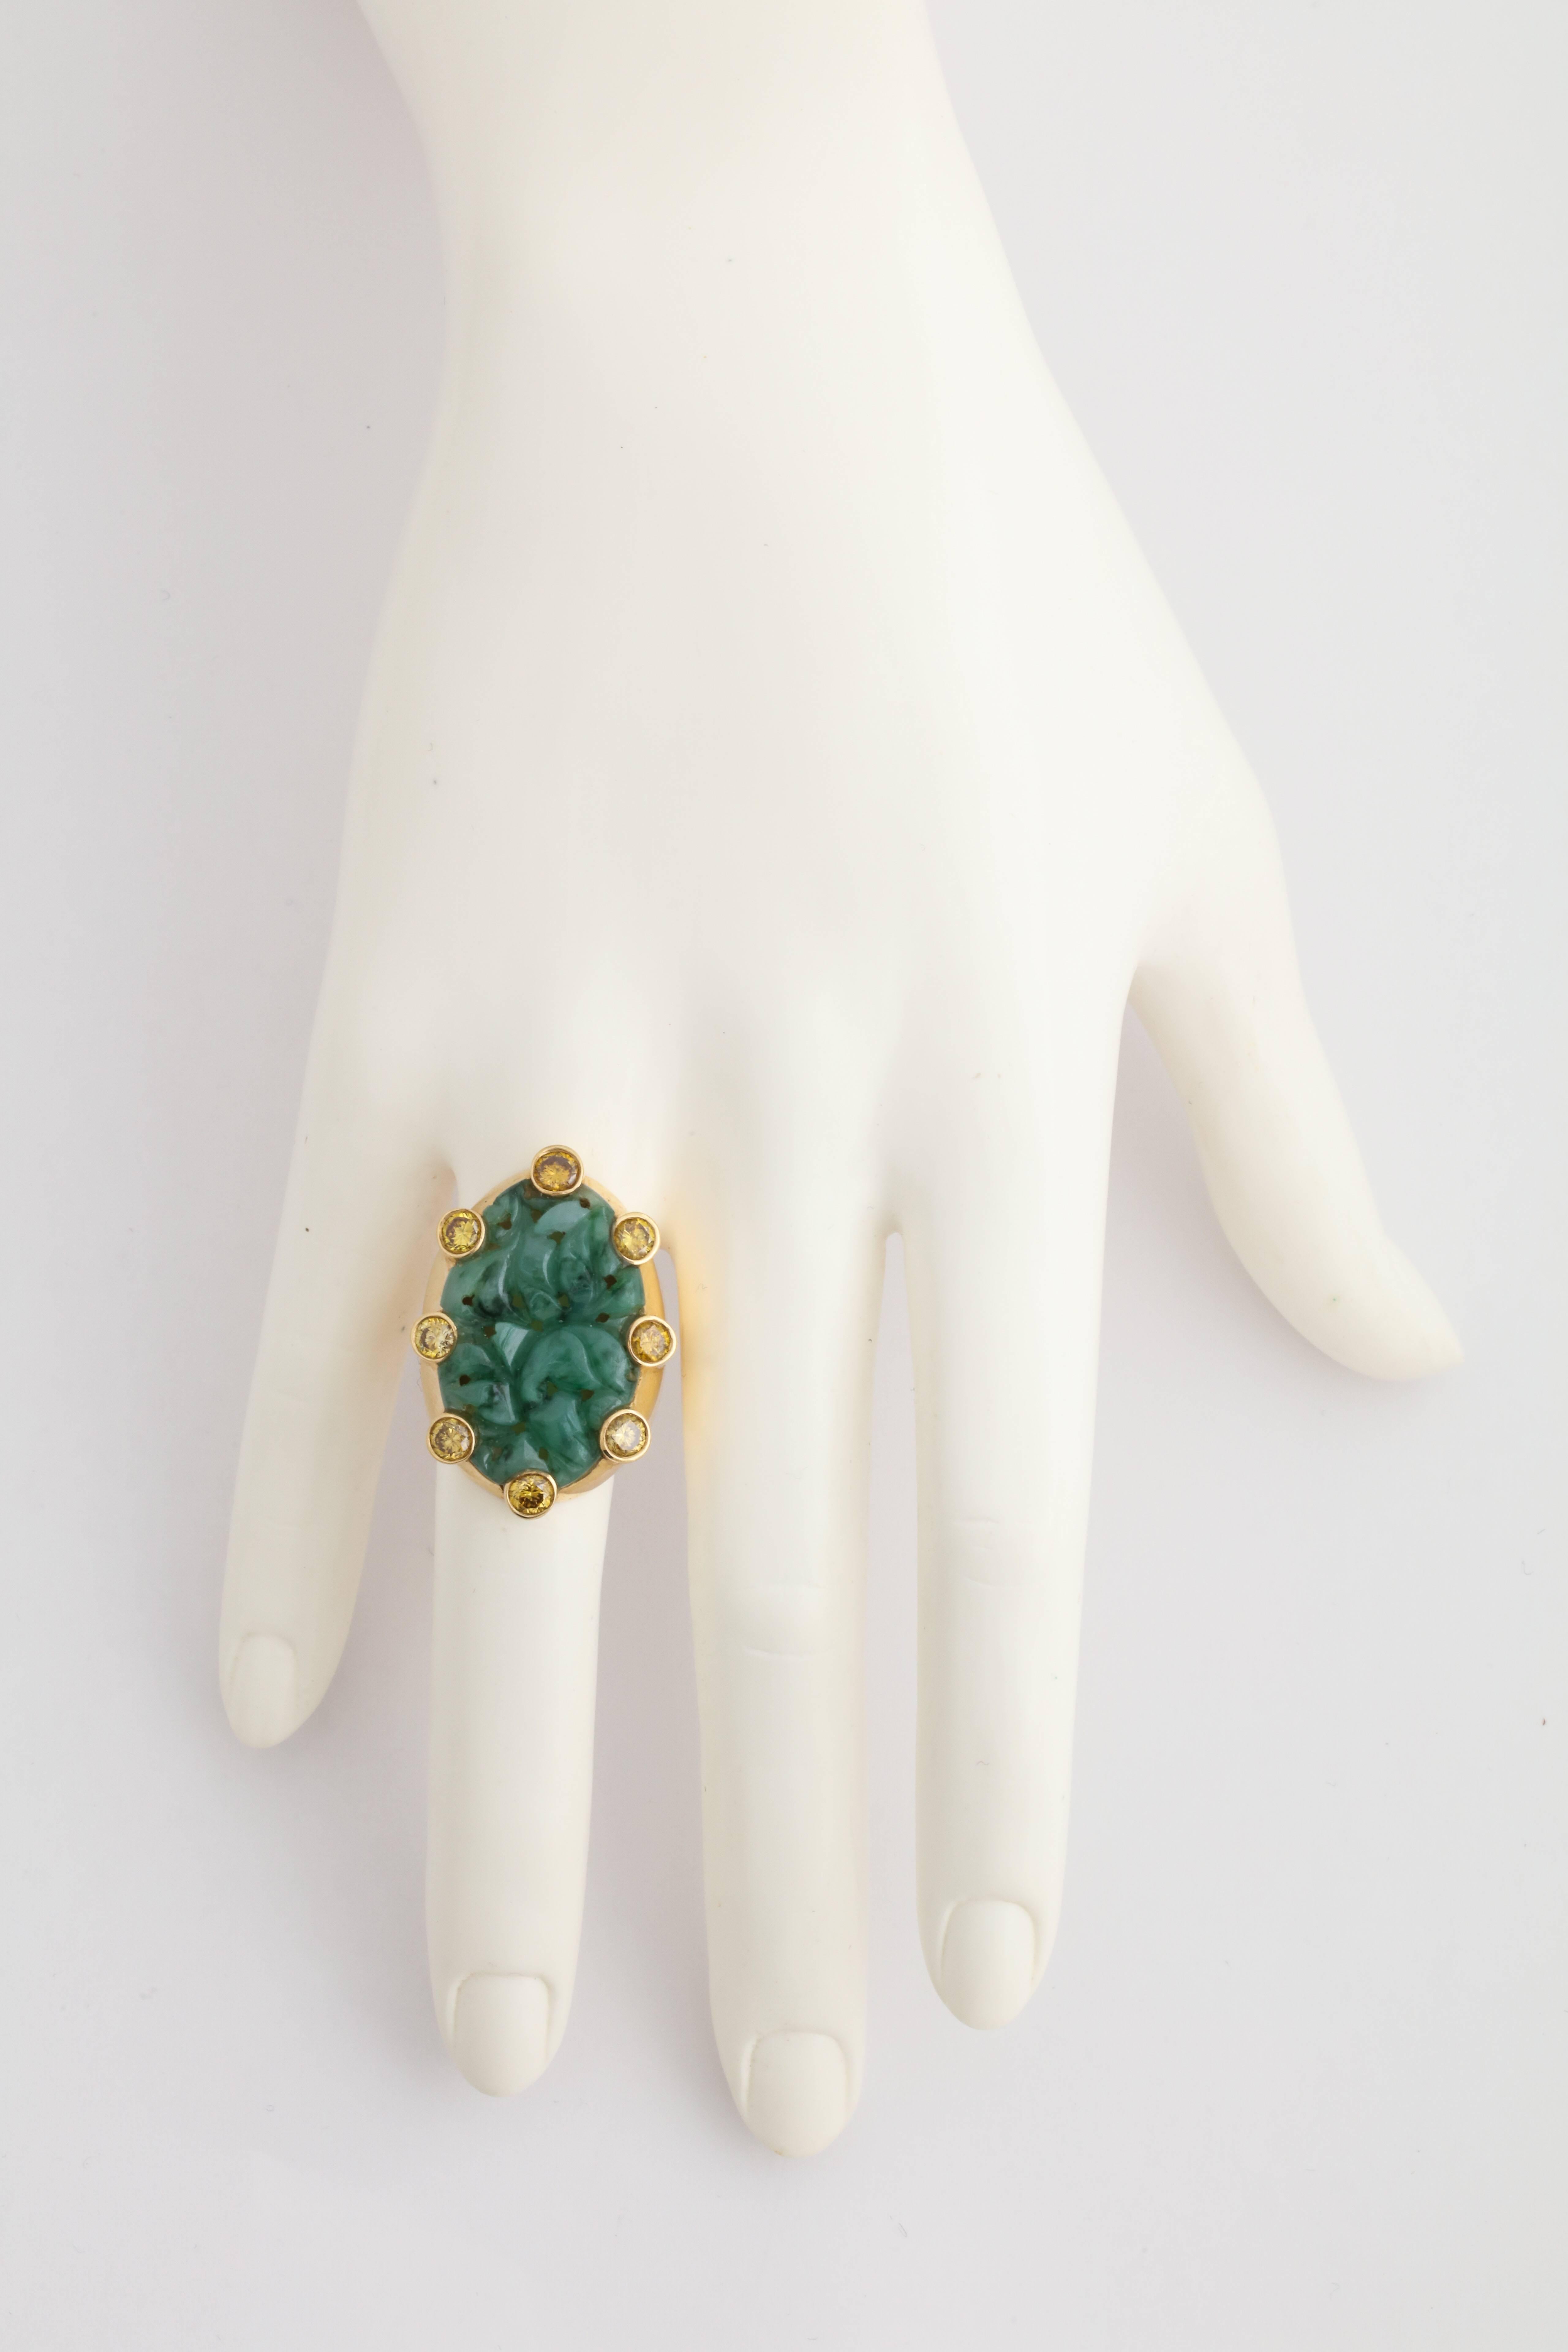 A truly one of a kind piece by a one of a kind designer.  Cooperman expertly combines these two contrasting materials.  The softness of the delicately carved sea green jade is offset by the bursting brilliance of the faceted yellow diamonds.  All